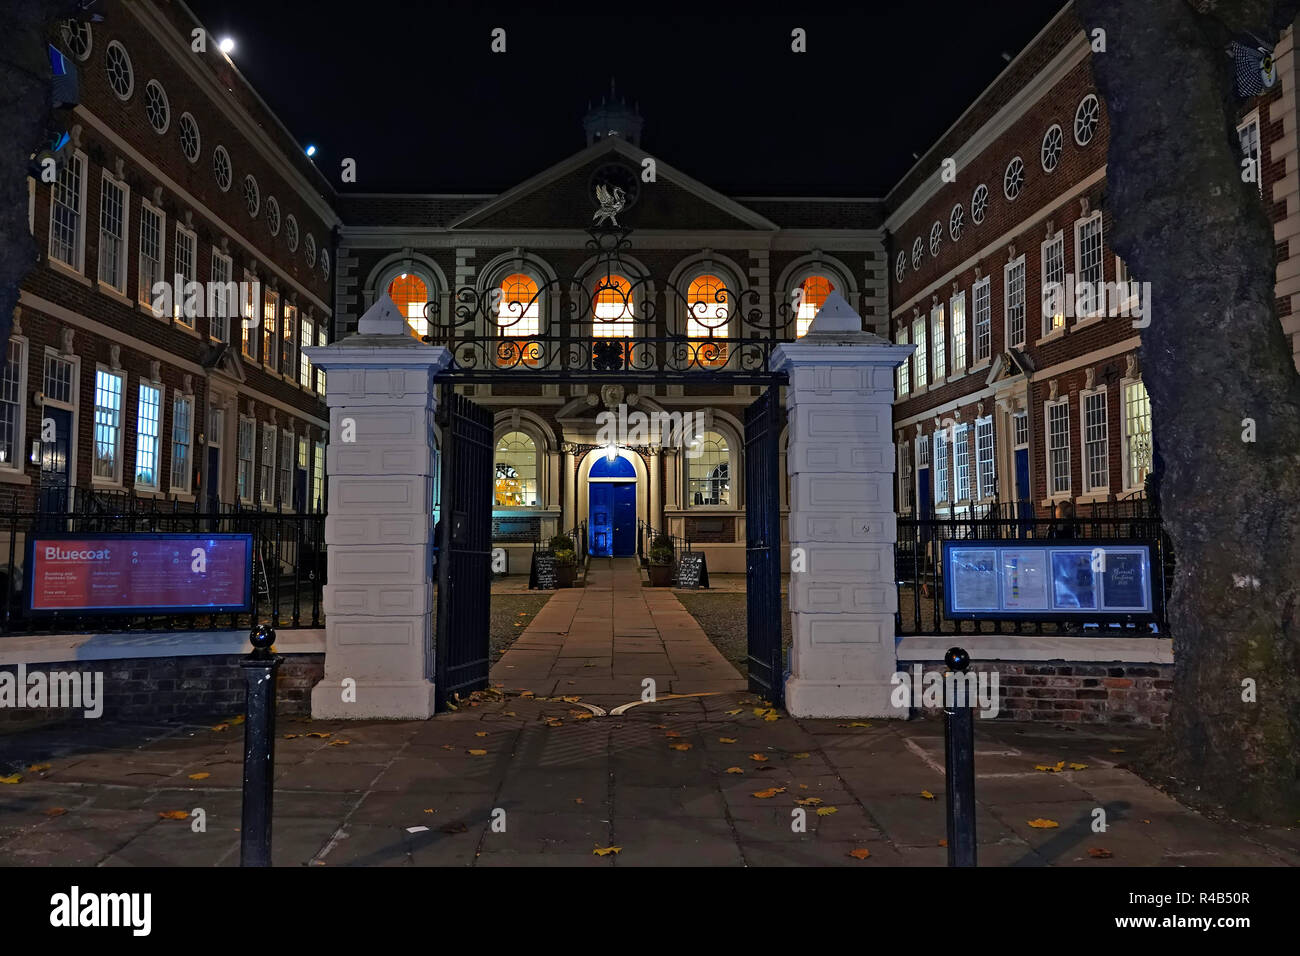 Built in 1716-17 as a school, Bluecoat Chambers in School Lane is the oldest surviving building in central Liverpool, UK. Shown lit up at nighttime. Stock Photo